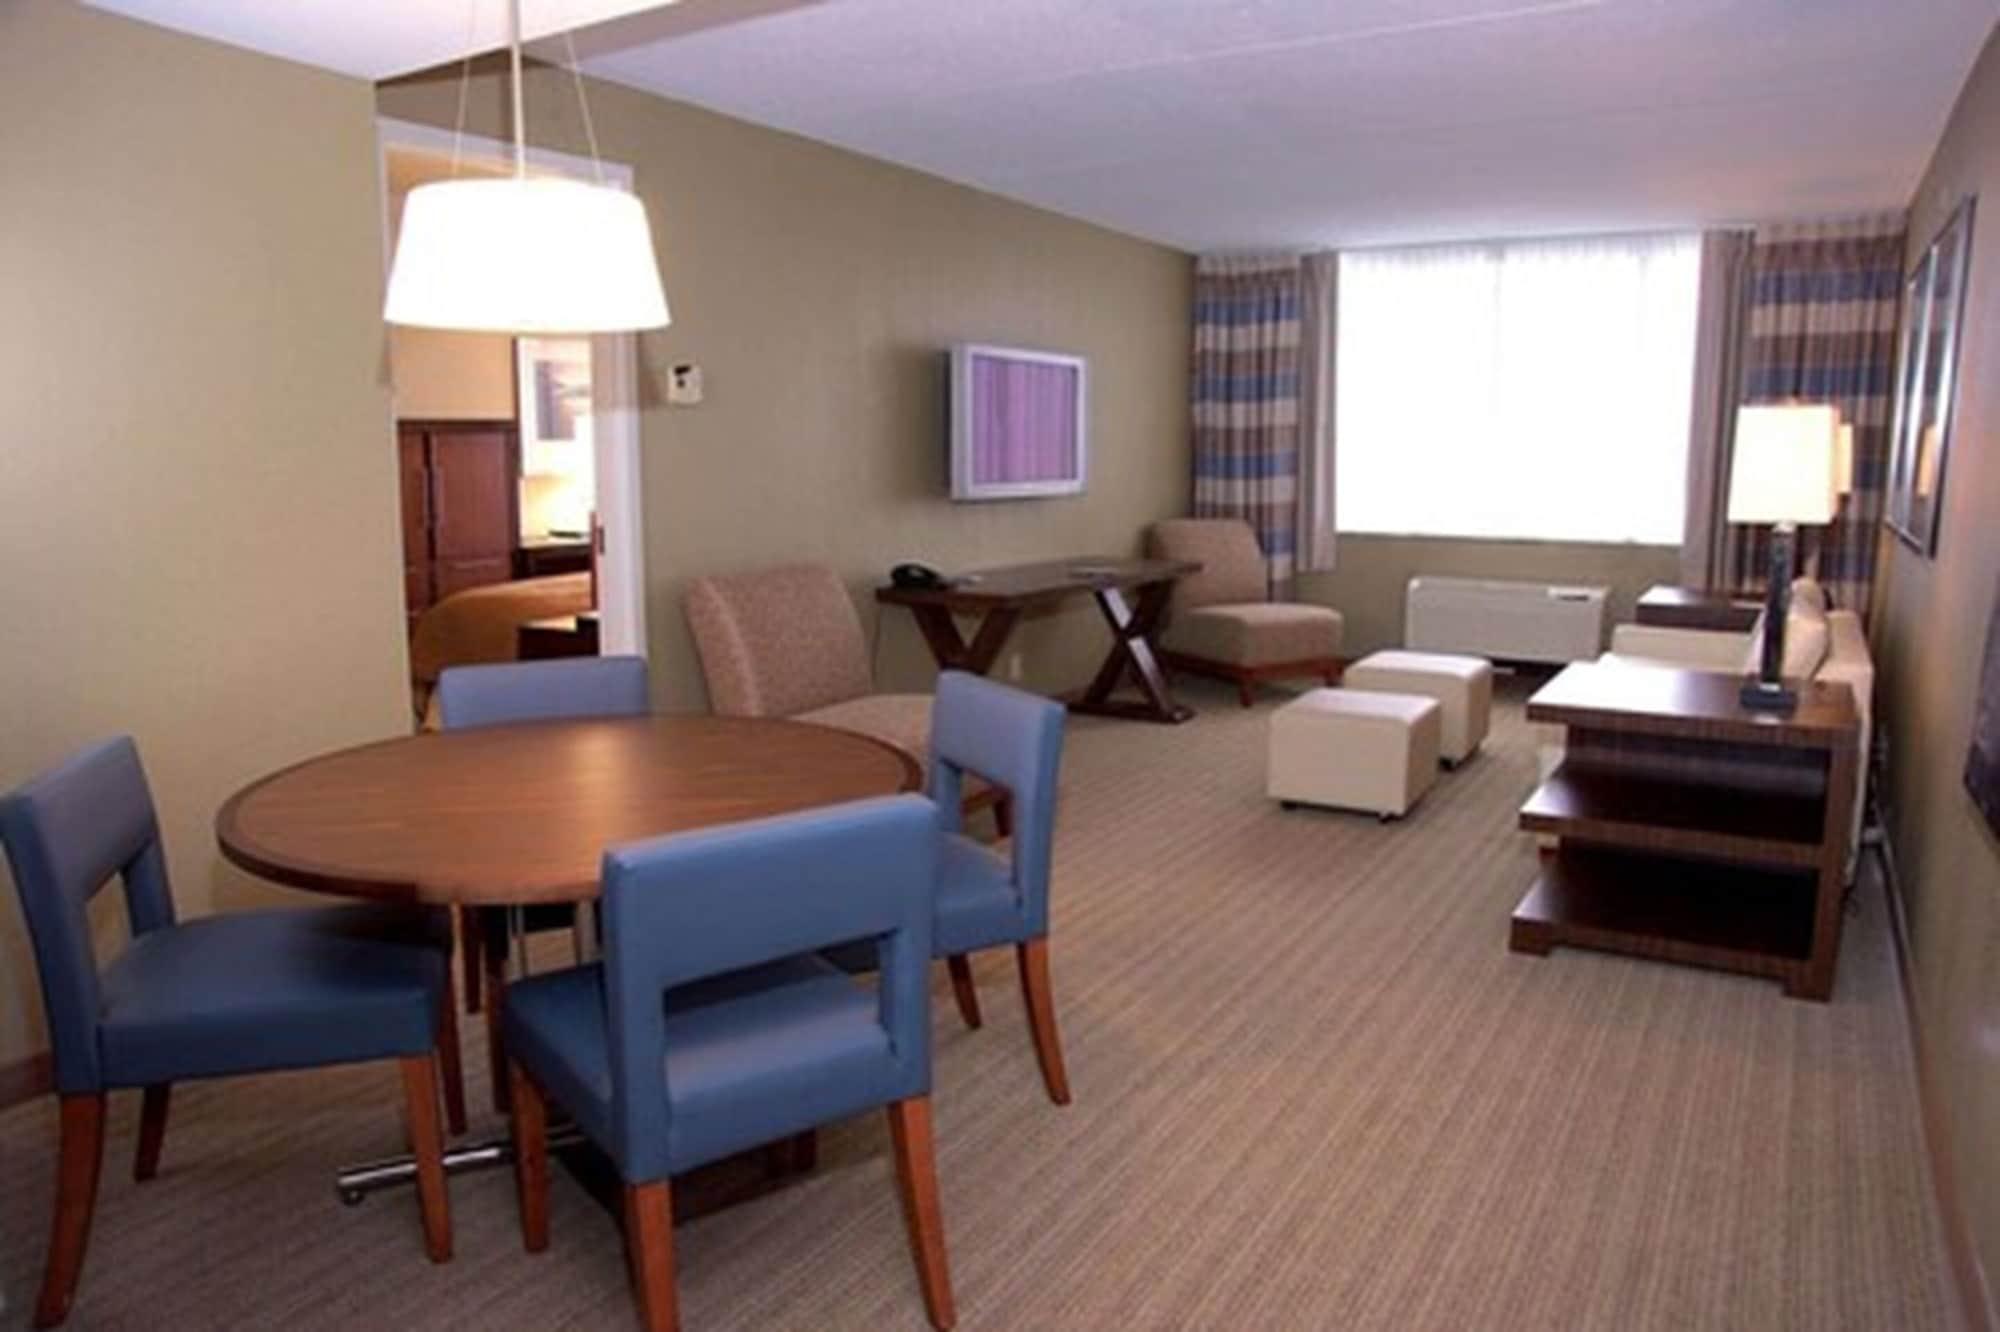 Doubletree By Hilton St. Louis At Westport Hotel Maryland Heights Quarto foto